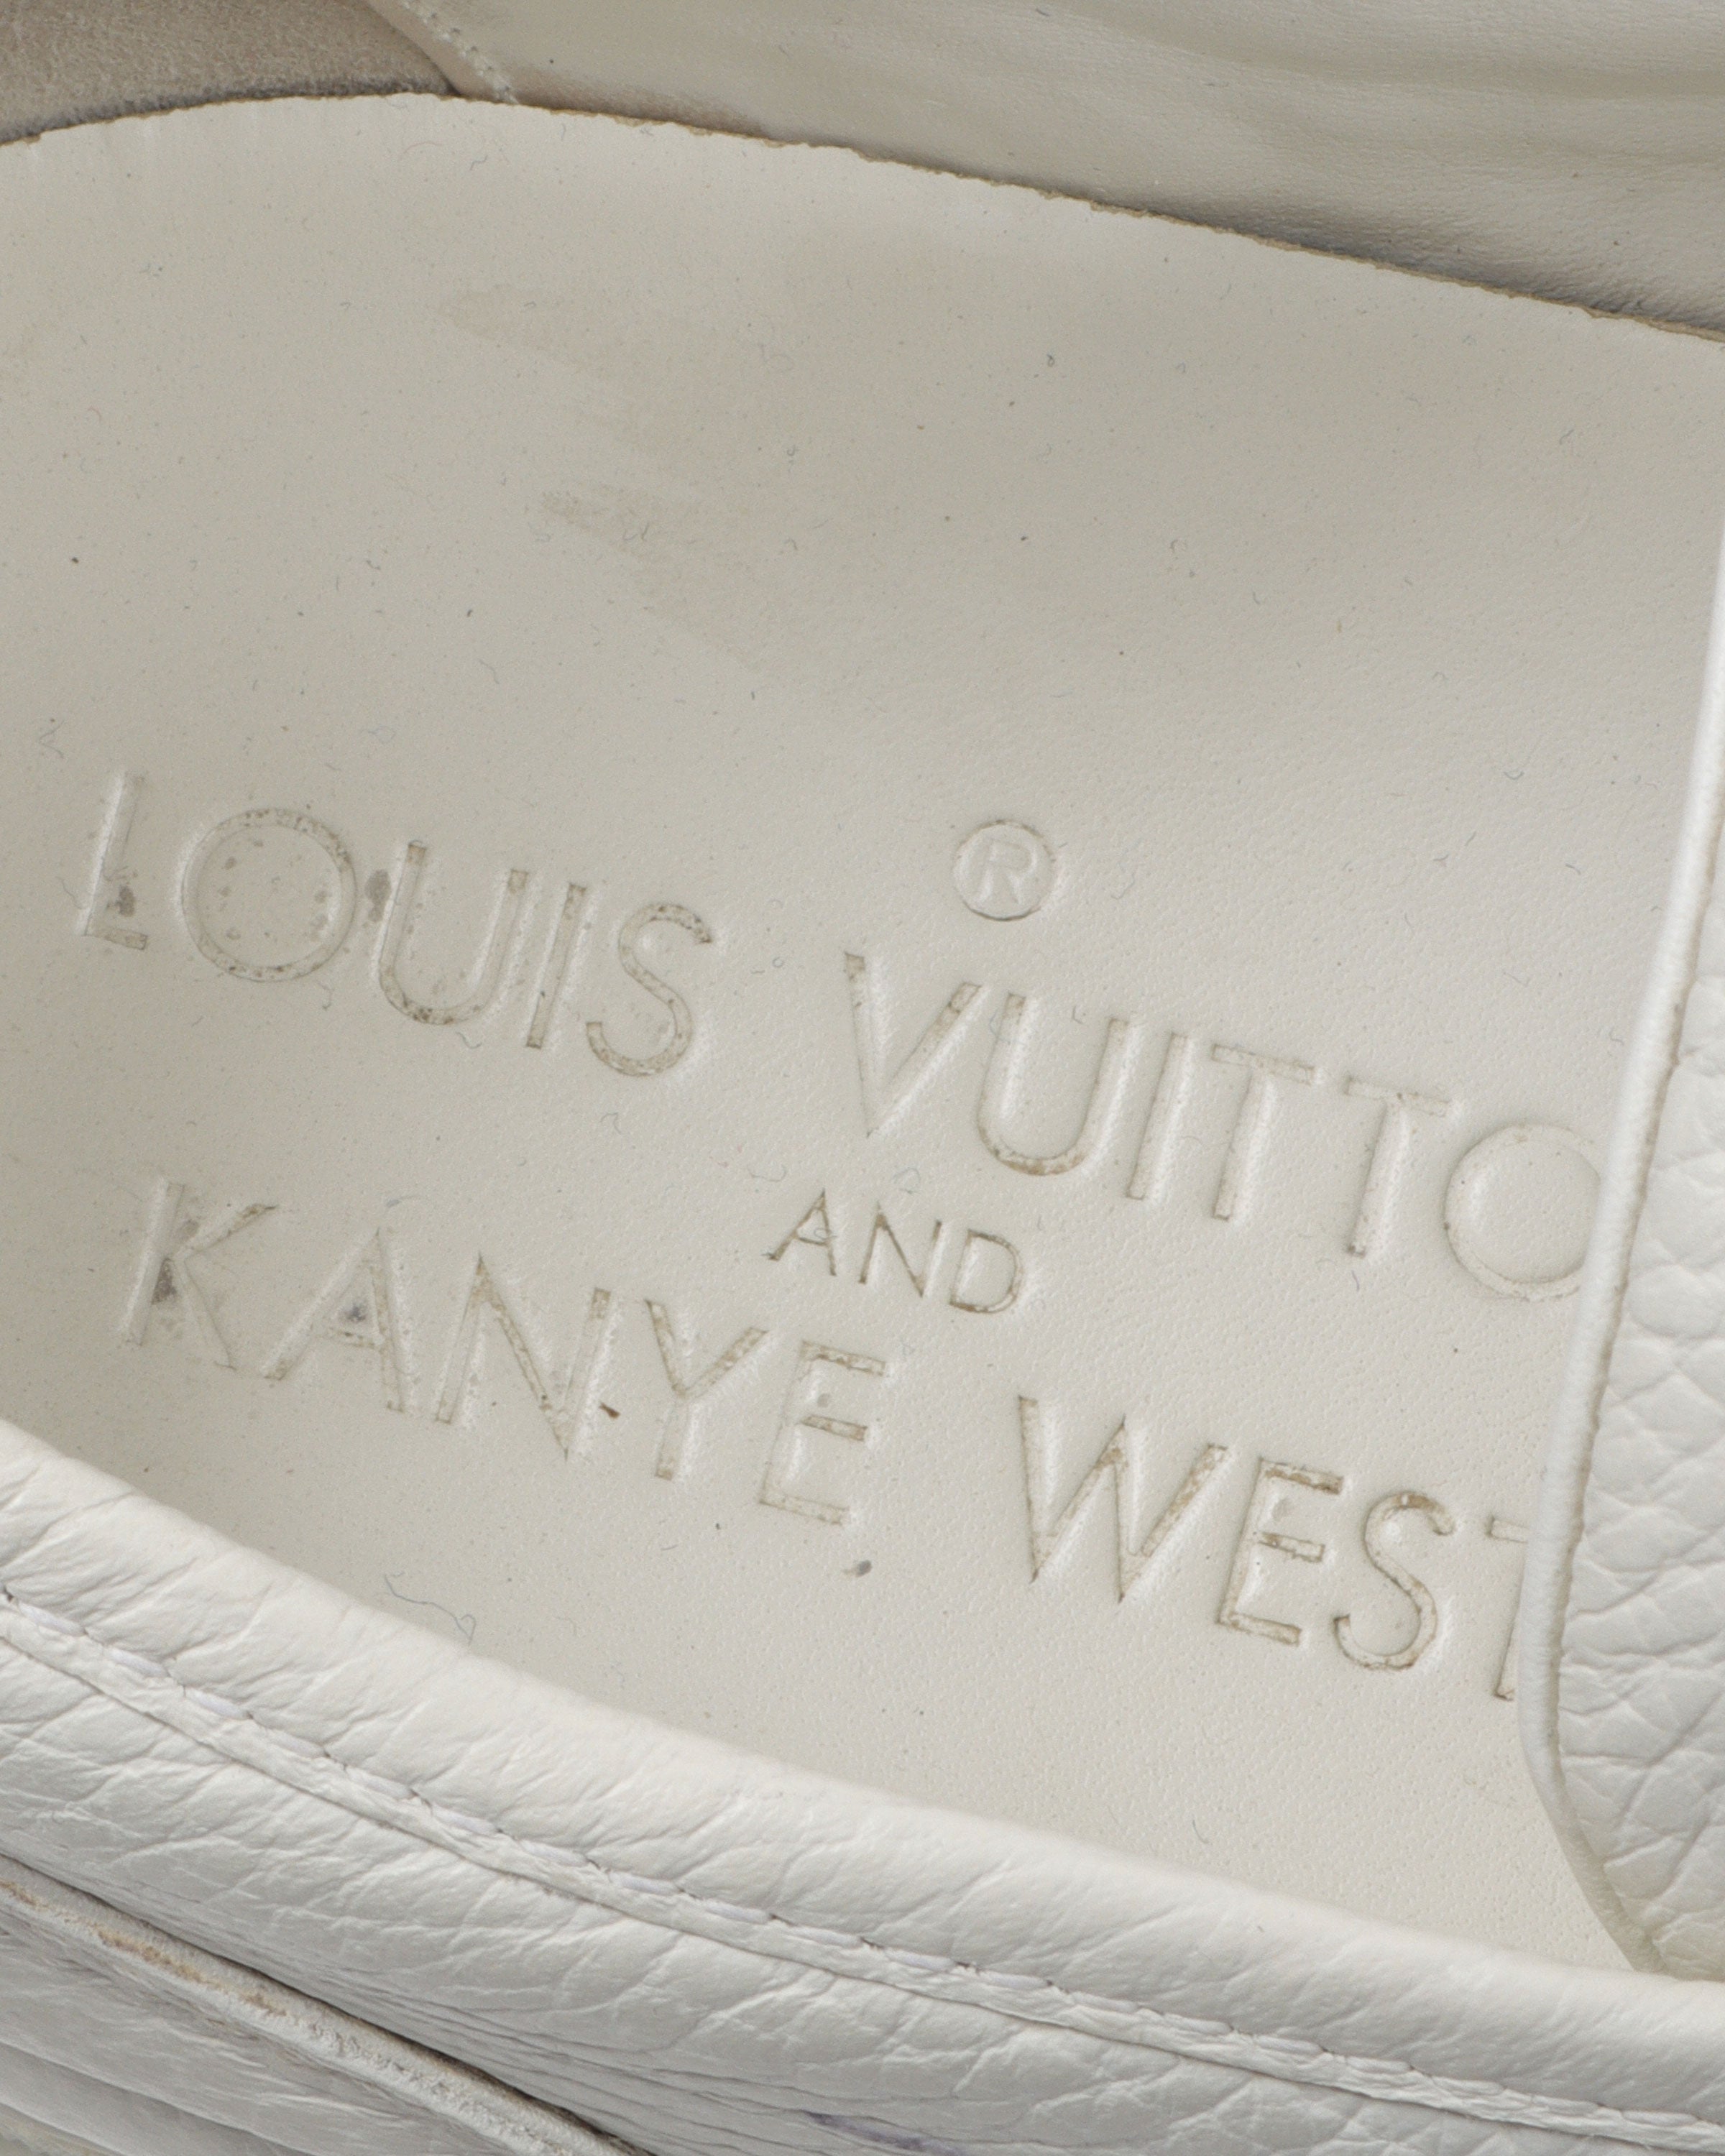 Louis Vuitton Kanye West Mr. Hudson Signed Sneakers